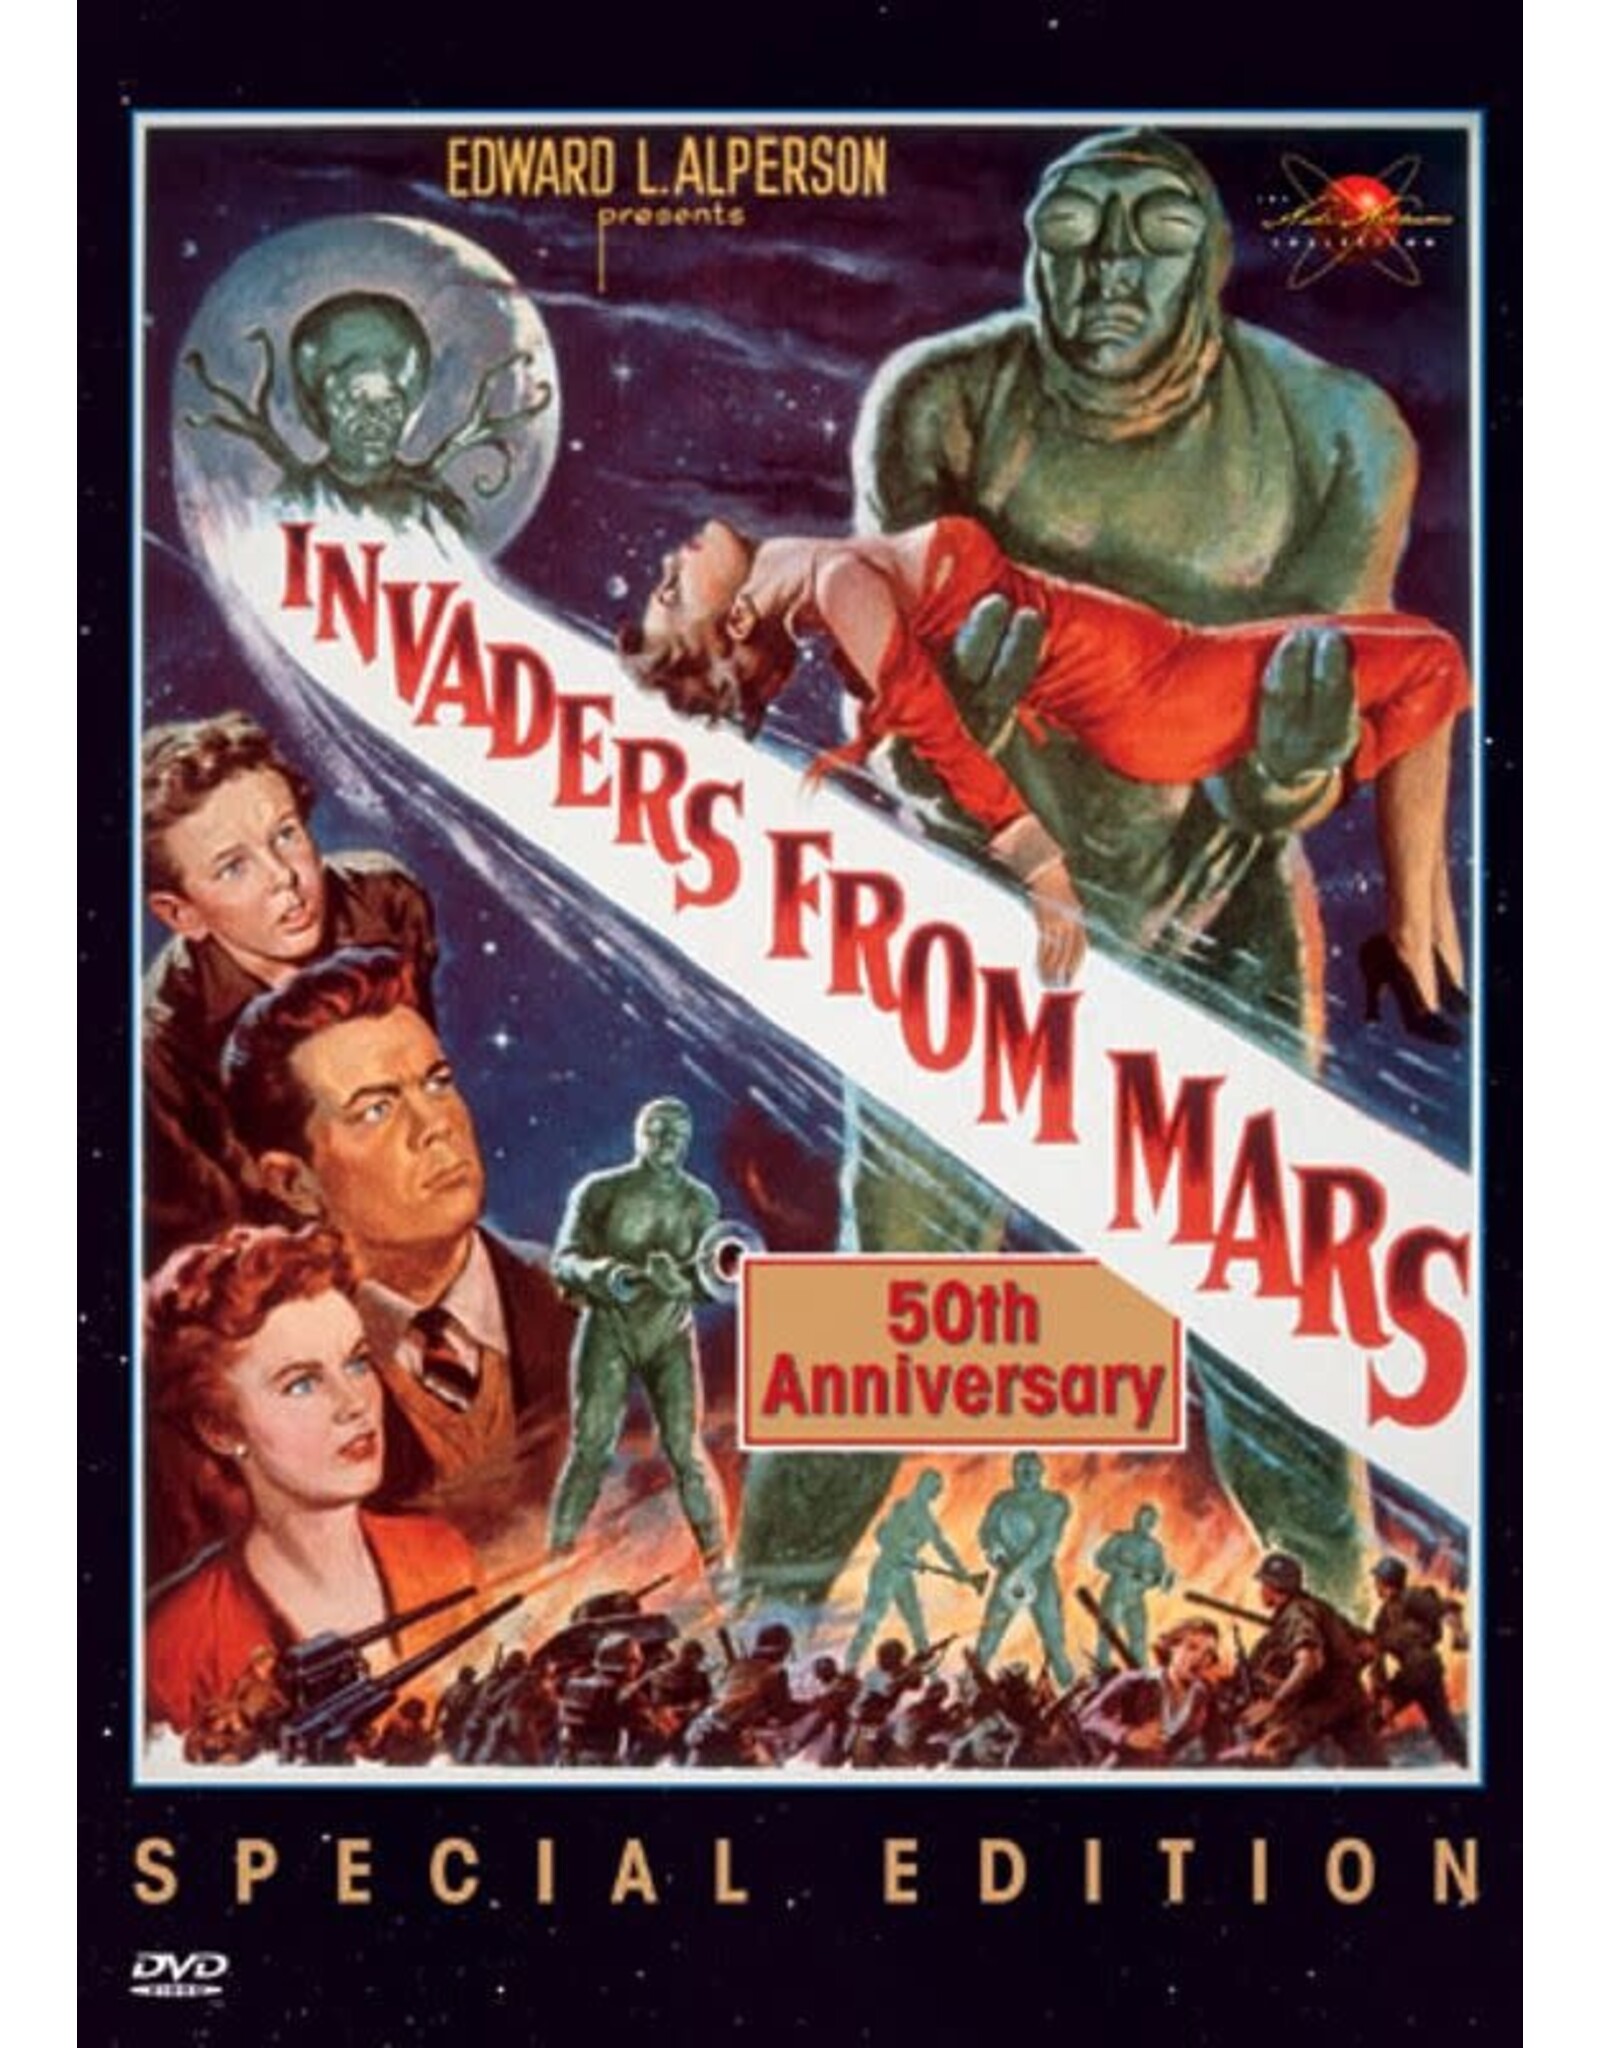 Horror Invaders From Mars Special Edition (Used)